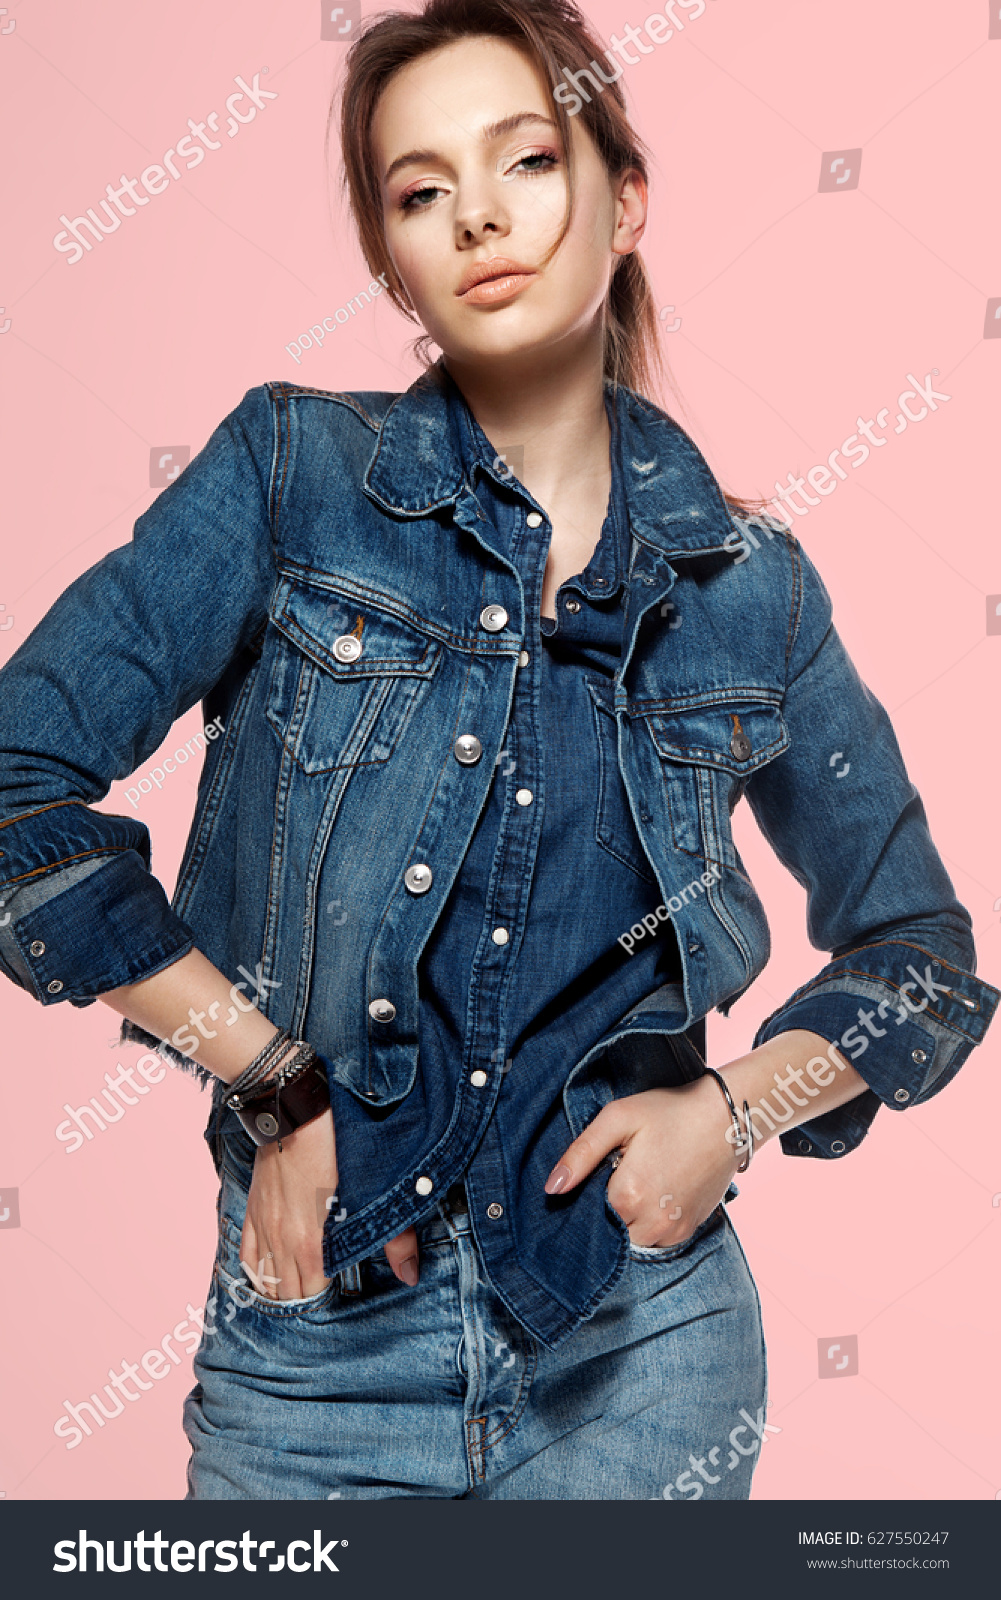 shirt with jeans jacket